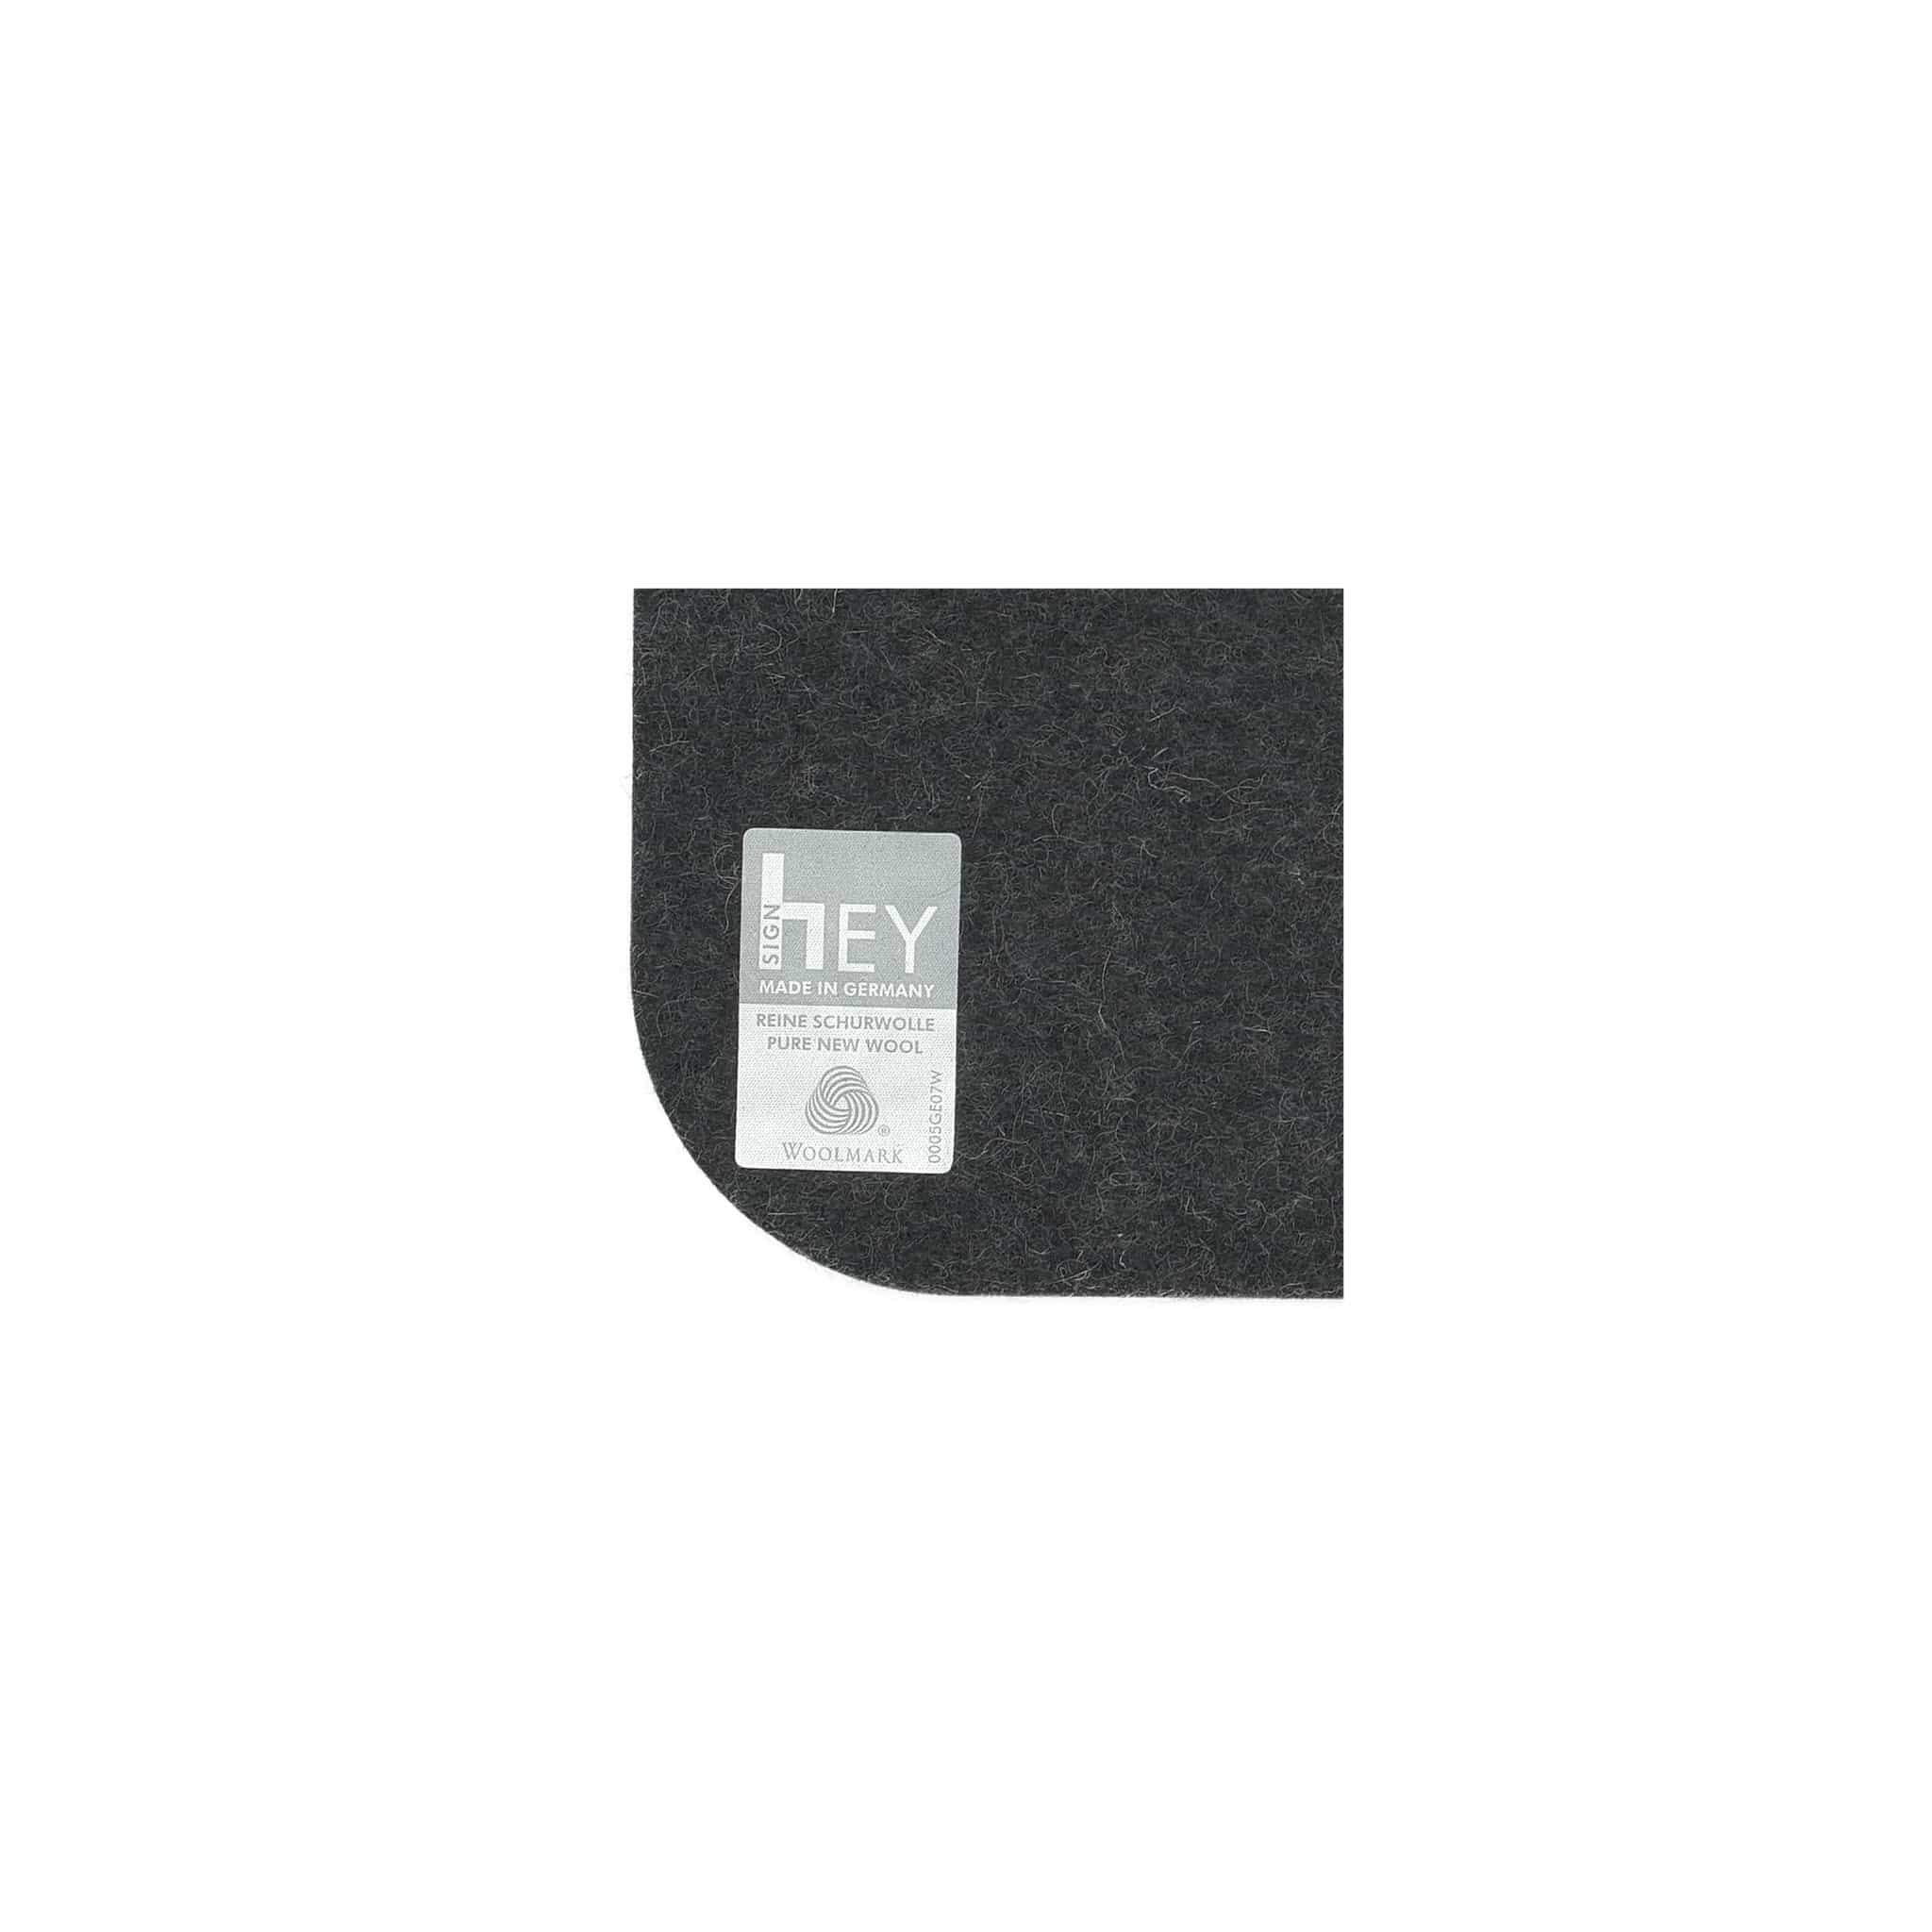 Rectangular Felt Placemat in Graphite by Hey-Sign 300134508 looking at Closeup-Label